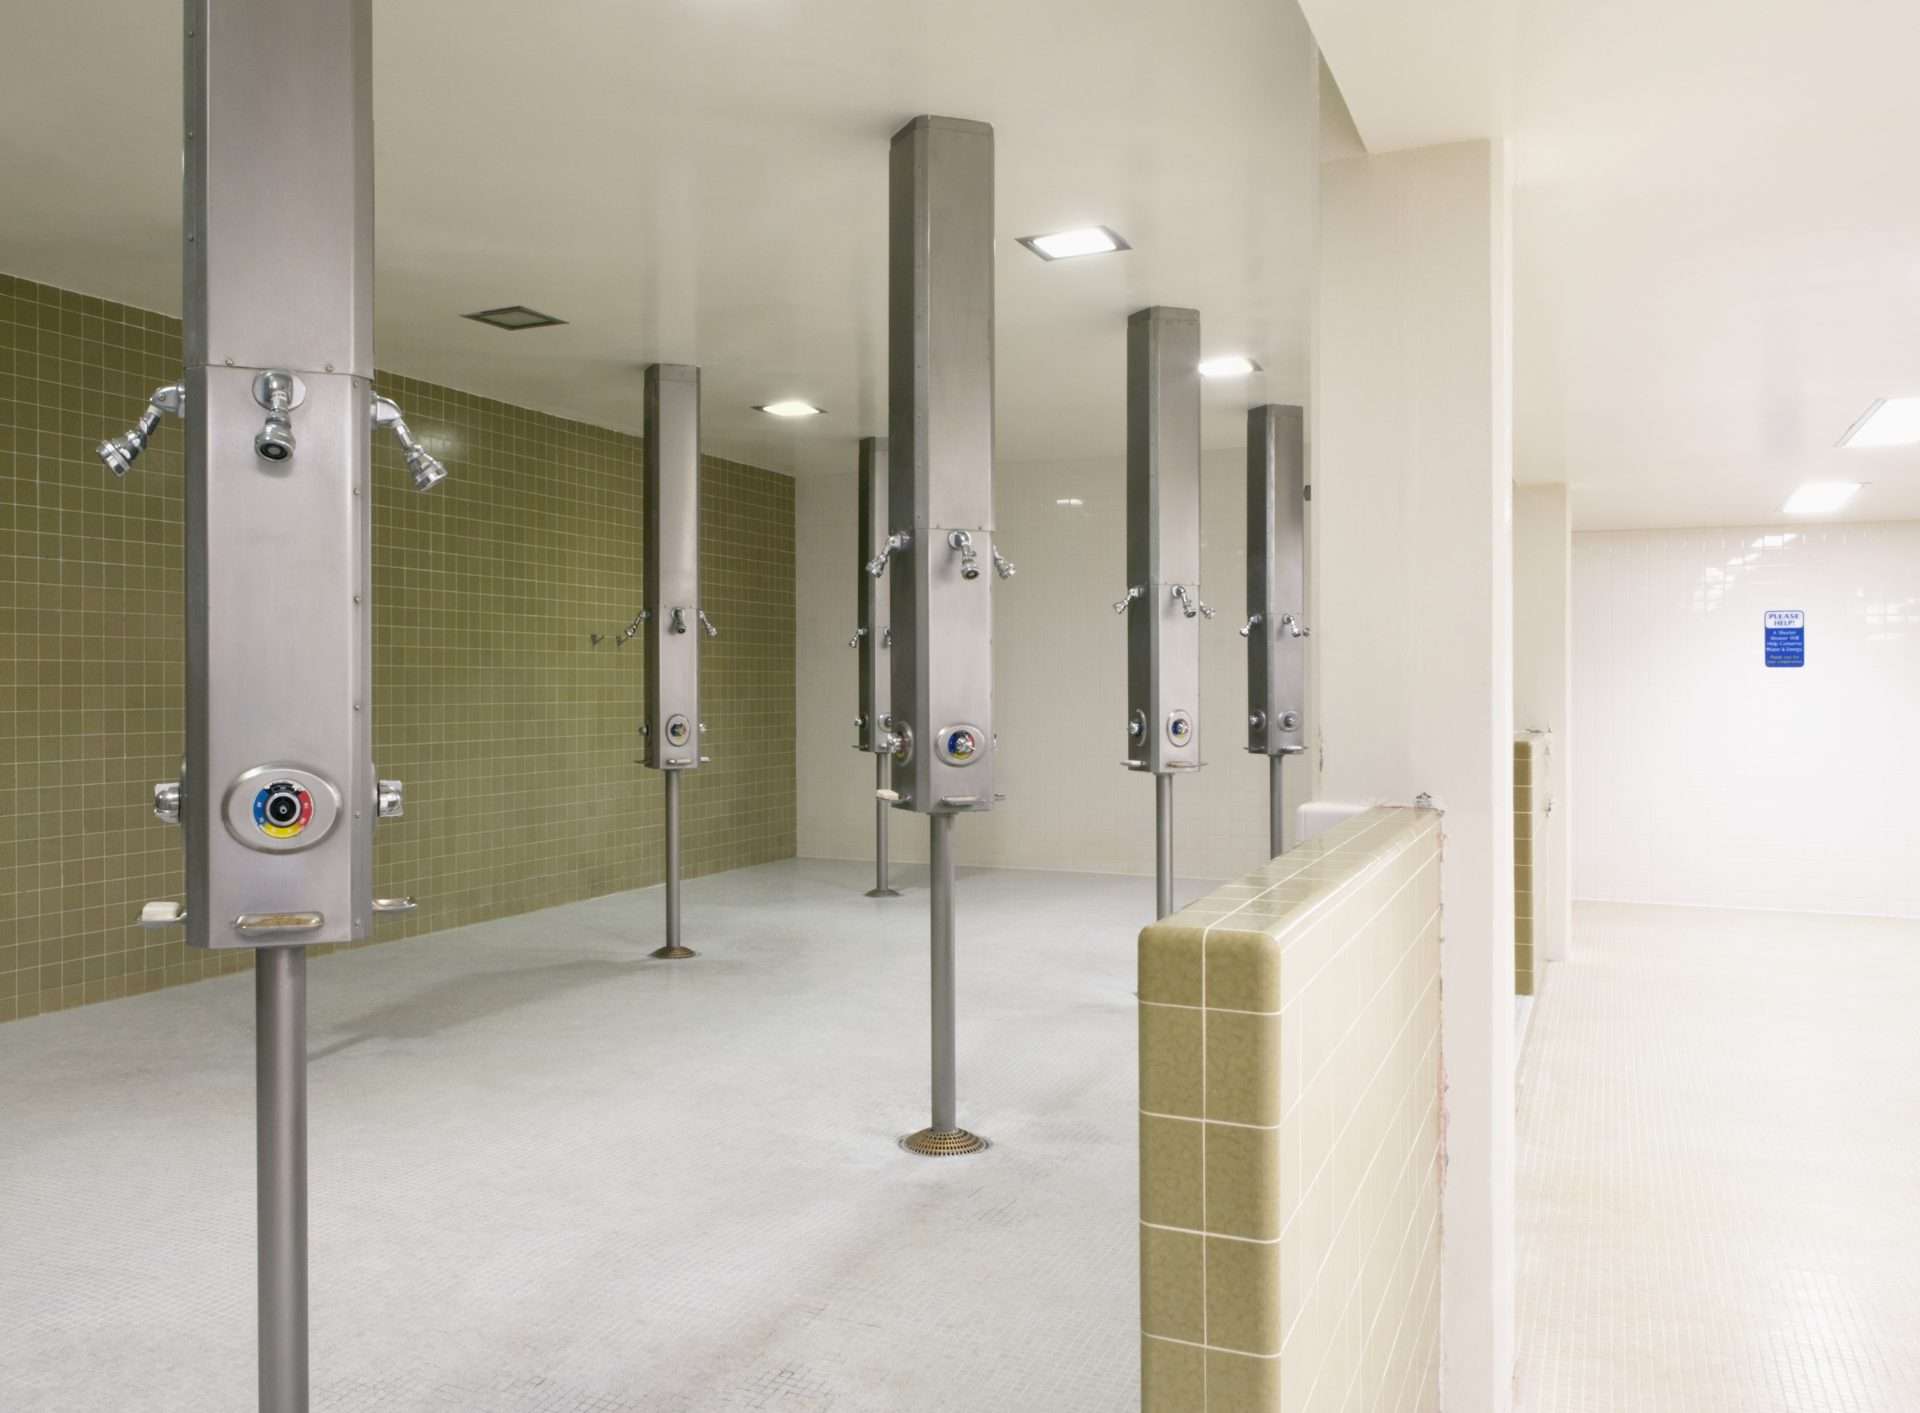 Showers in a gym